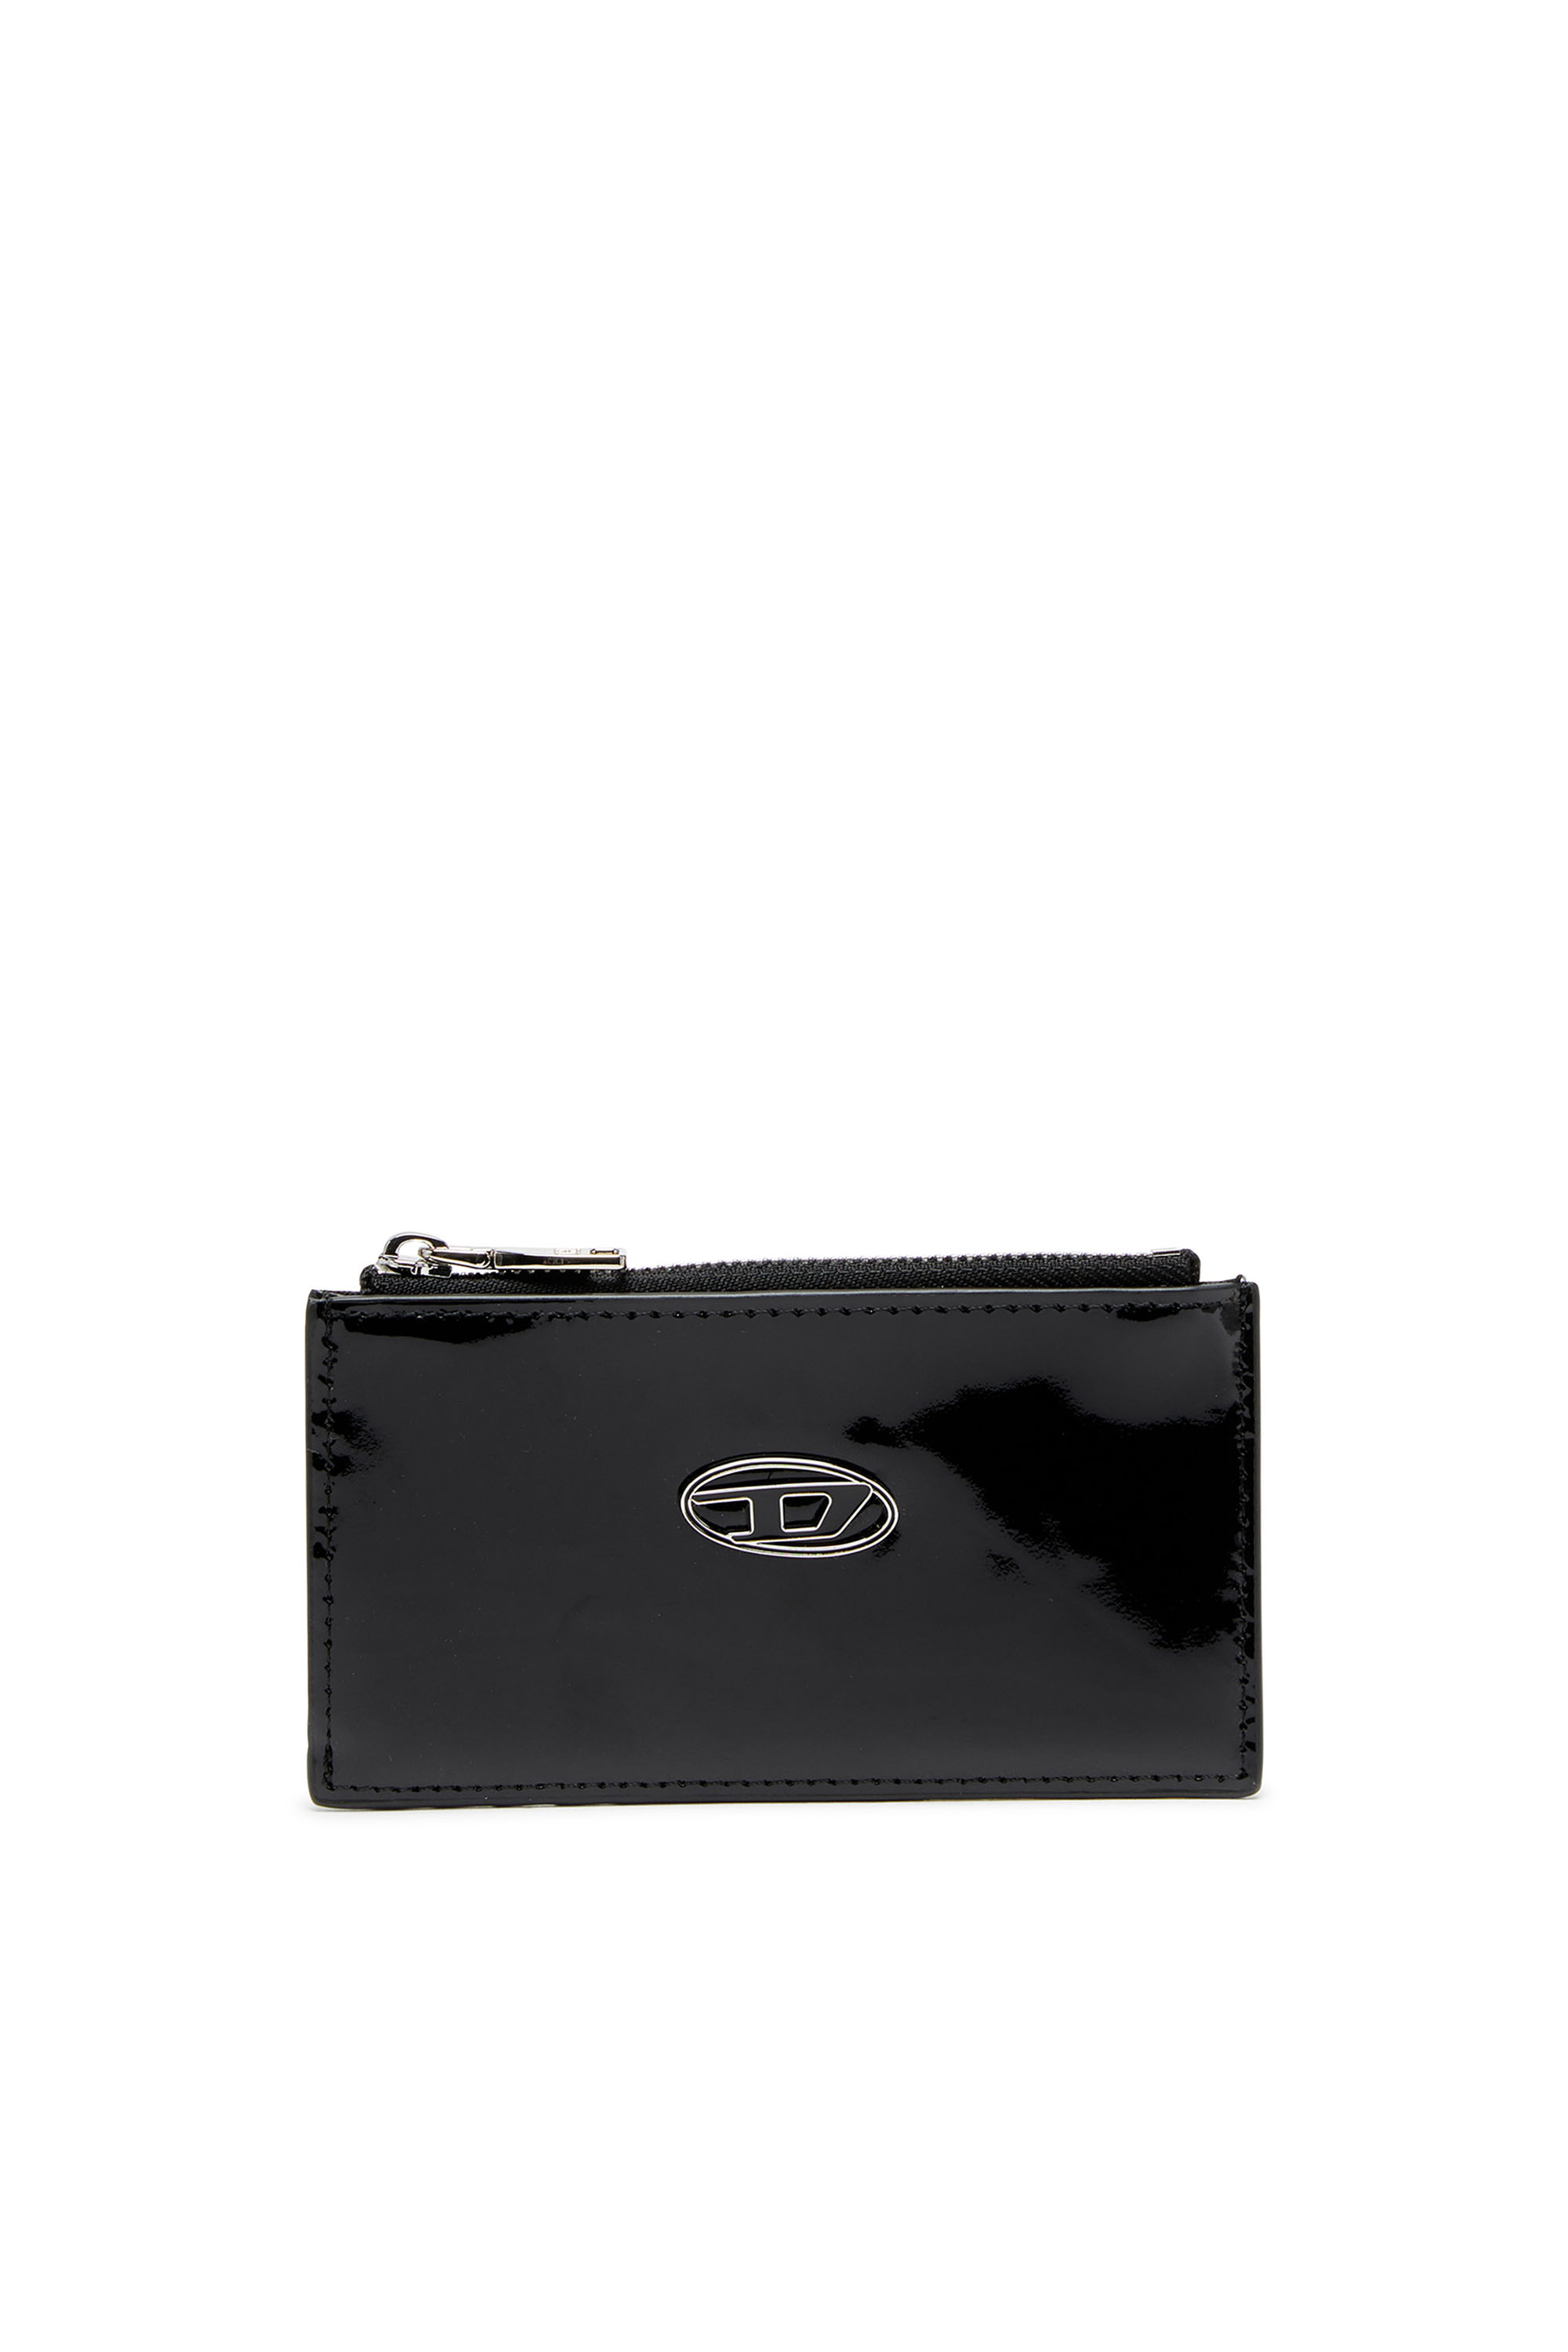 Diesel - PLAY CARD HOLDER III, Female Card holder in glossy leather in ブラック - Image 1